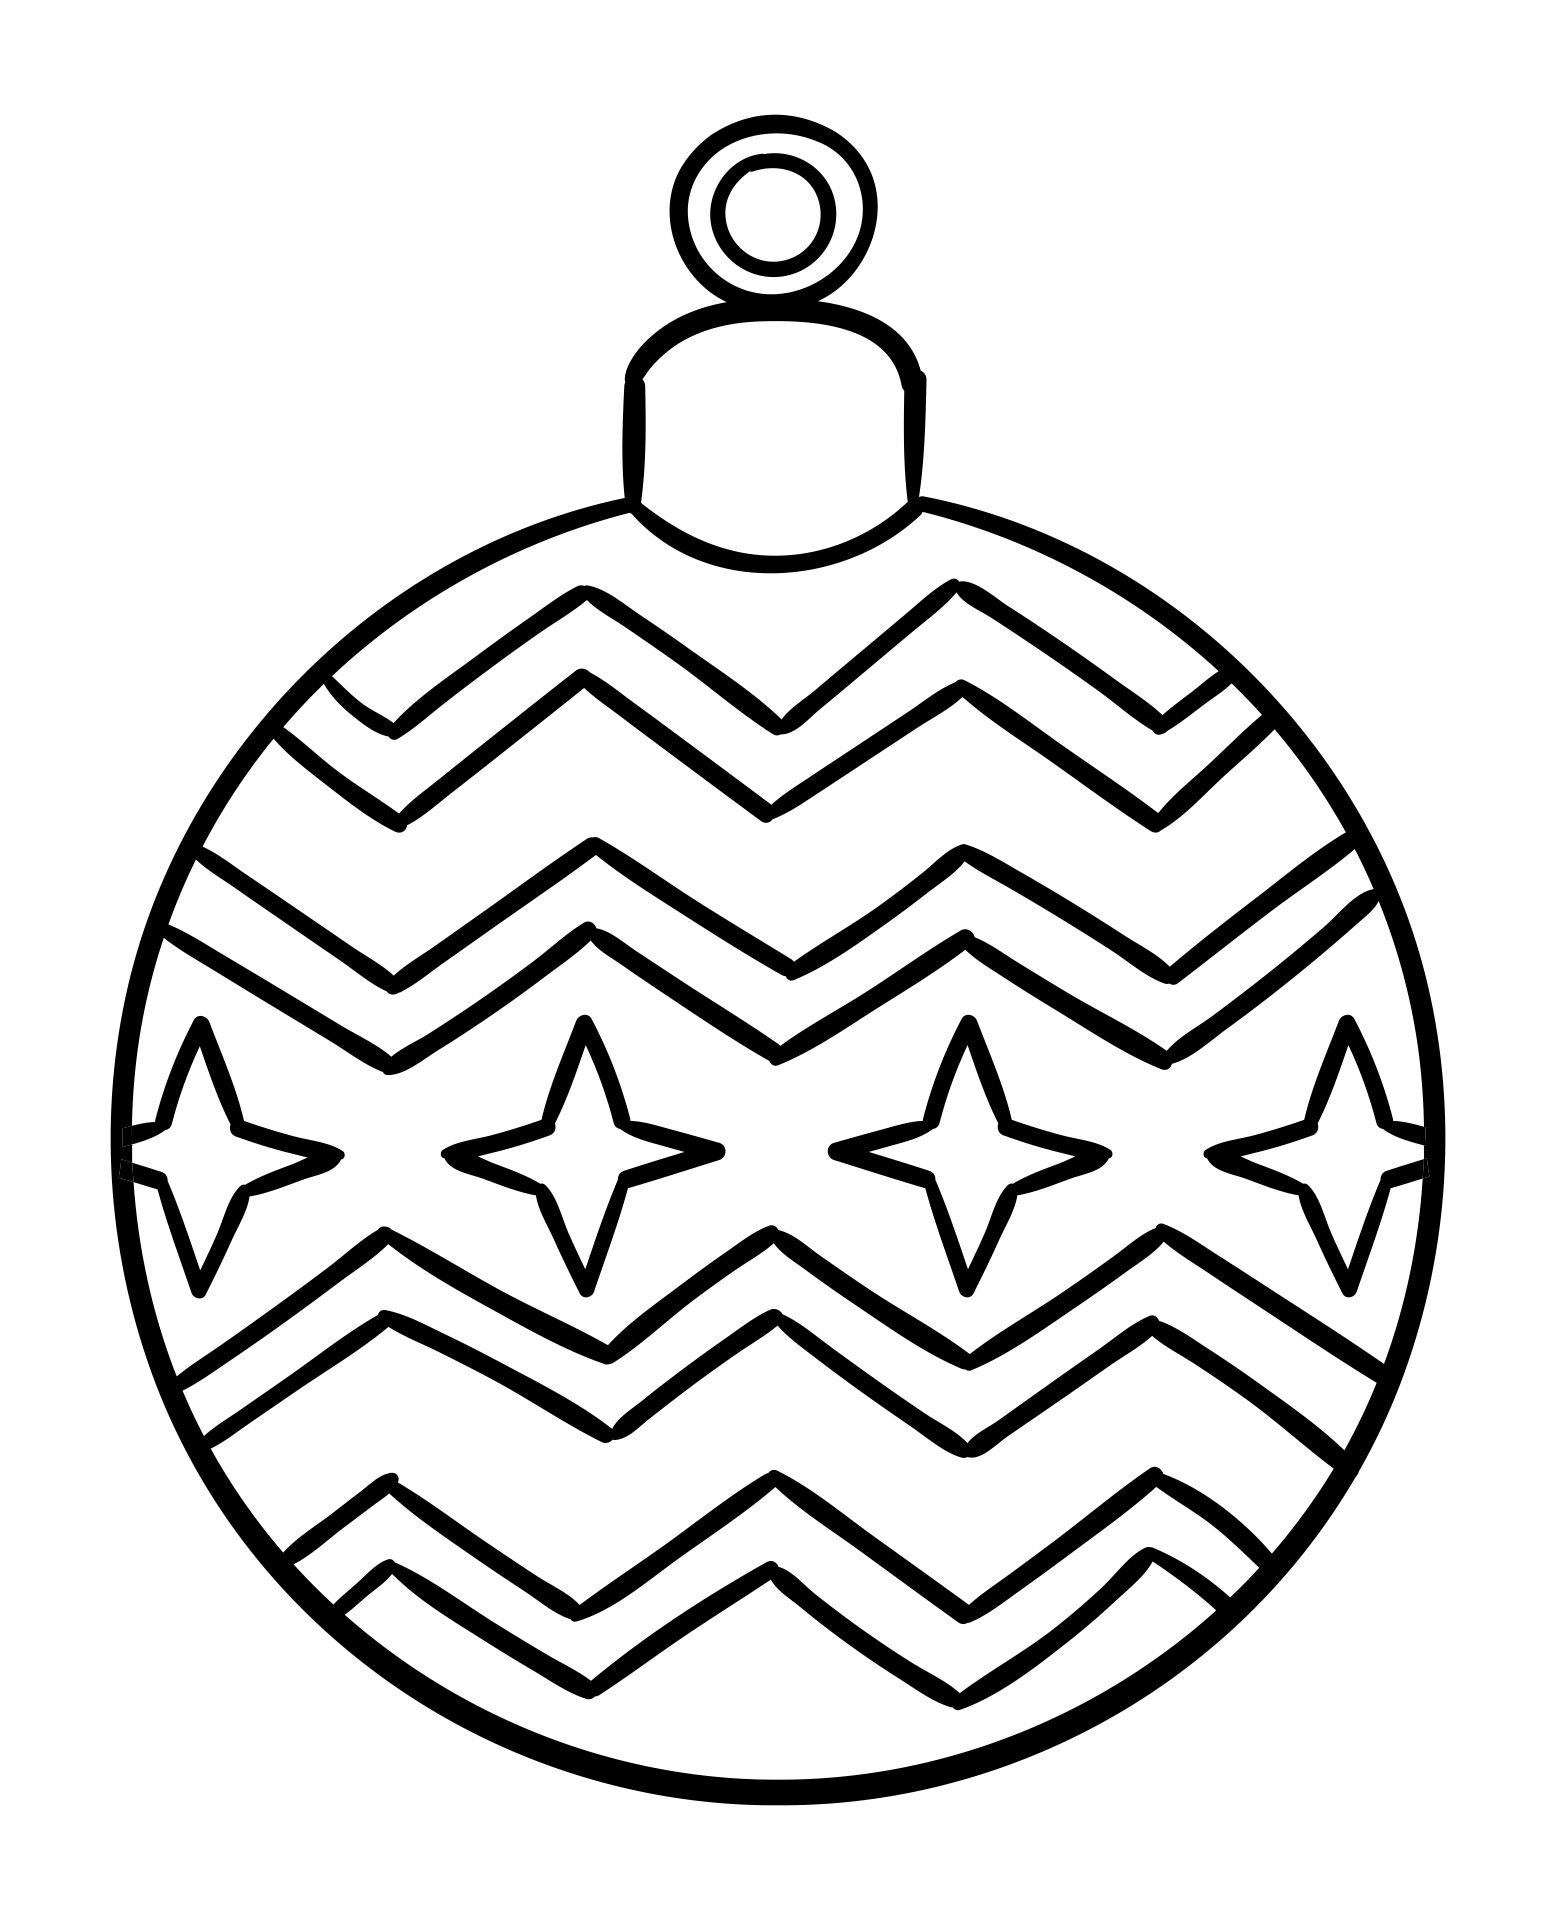 Top 100 Christmas tree coloring pages: The ultimate (free!) printable  collection - Print Color Fun!